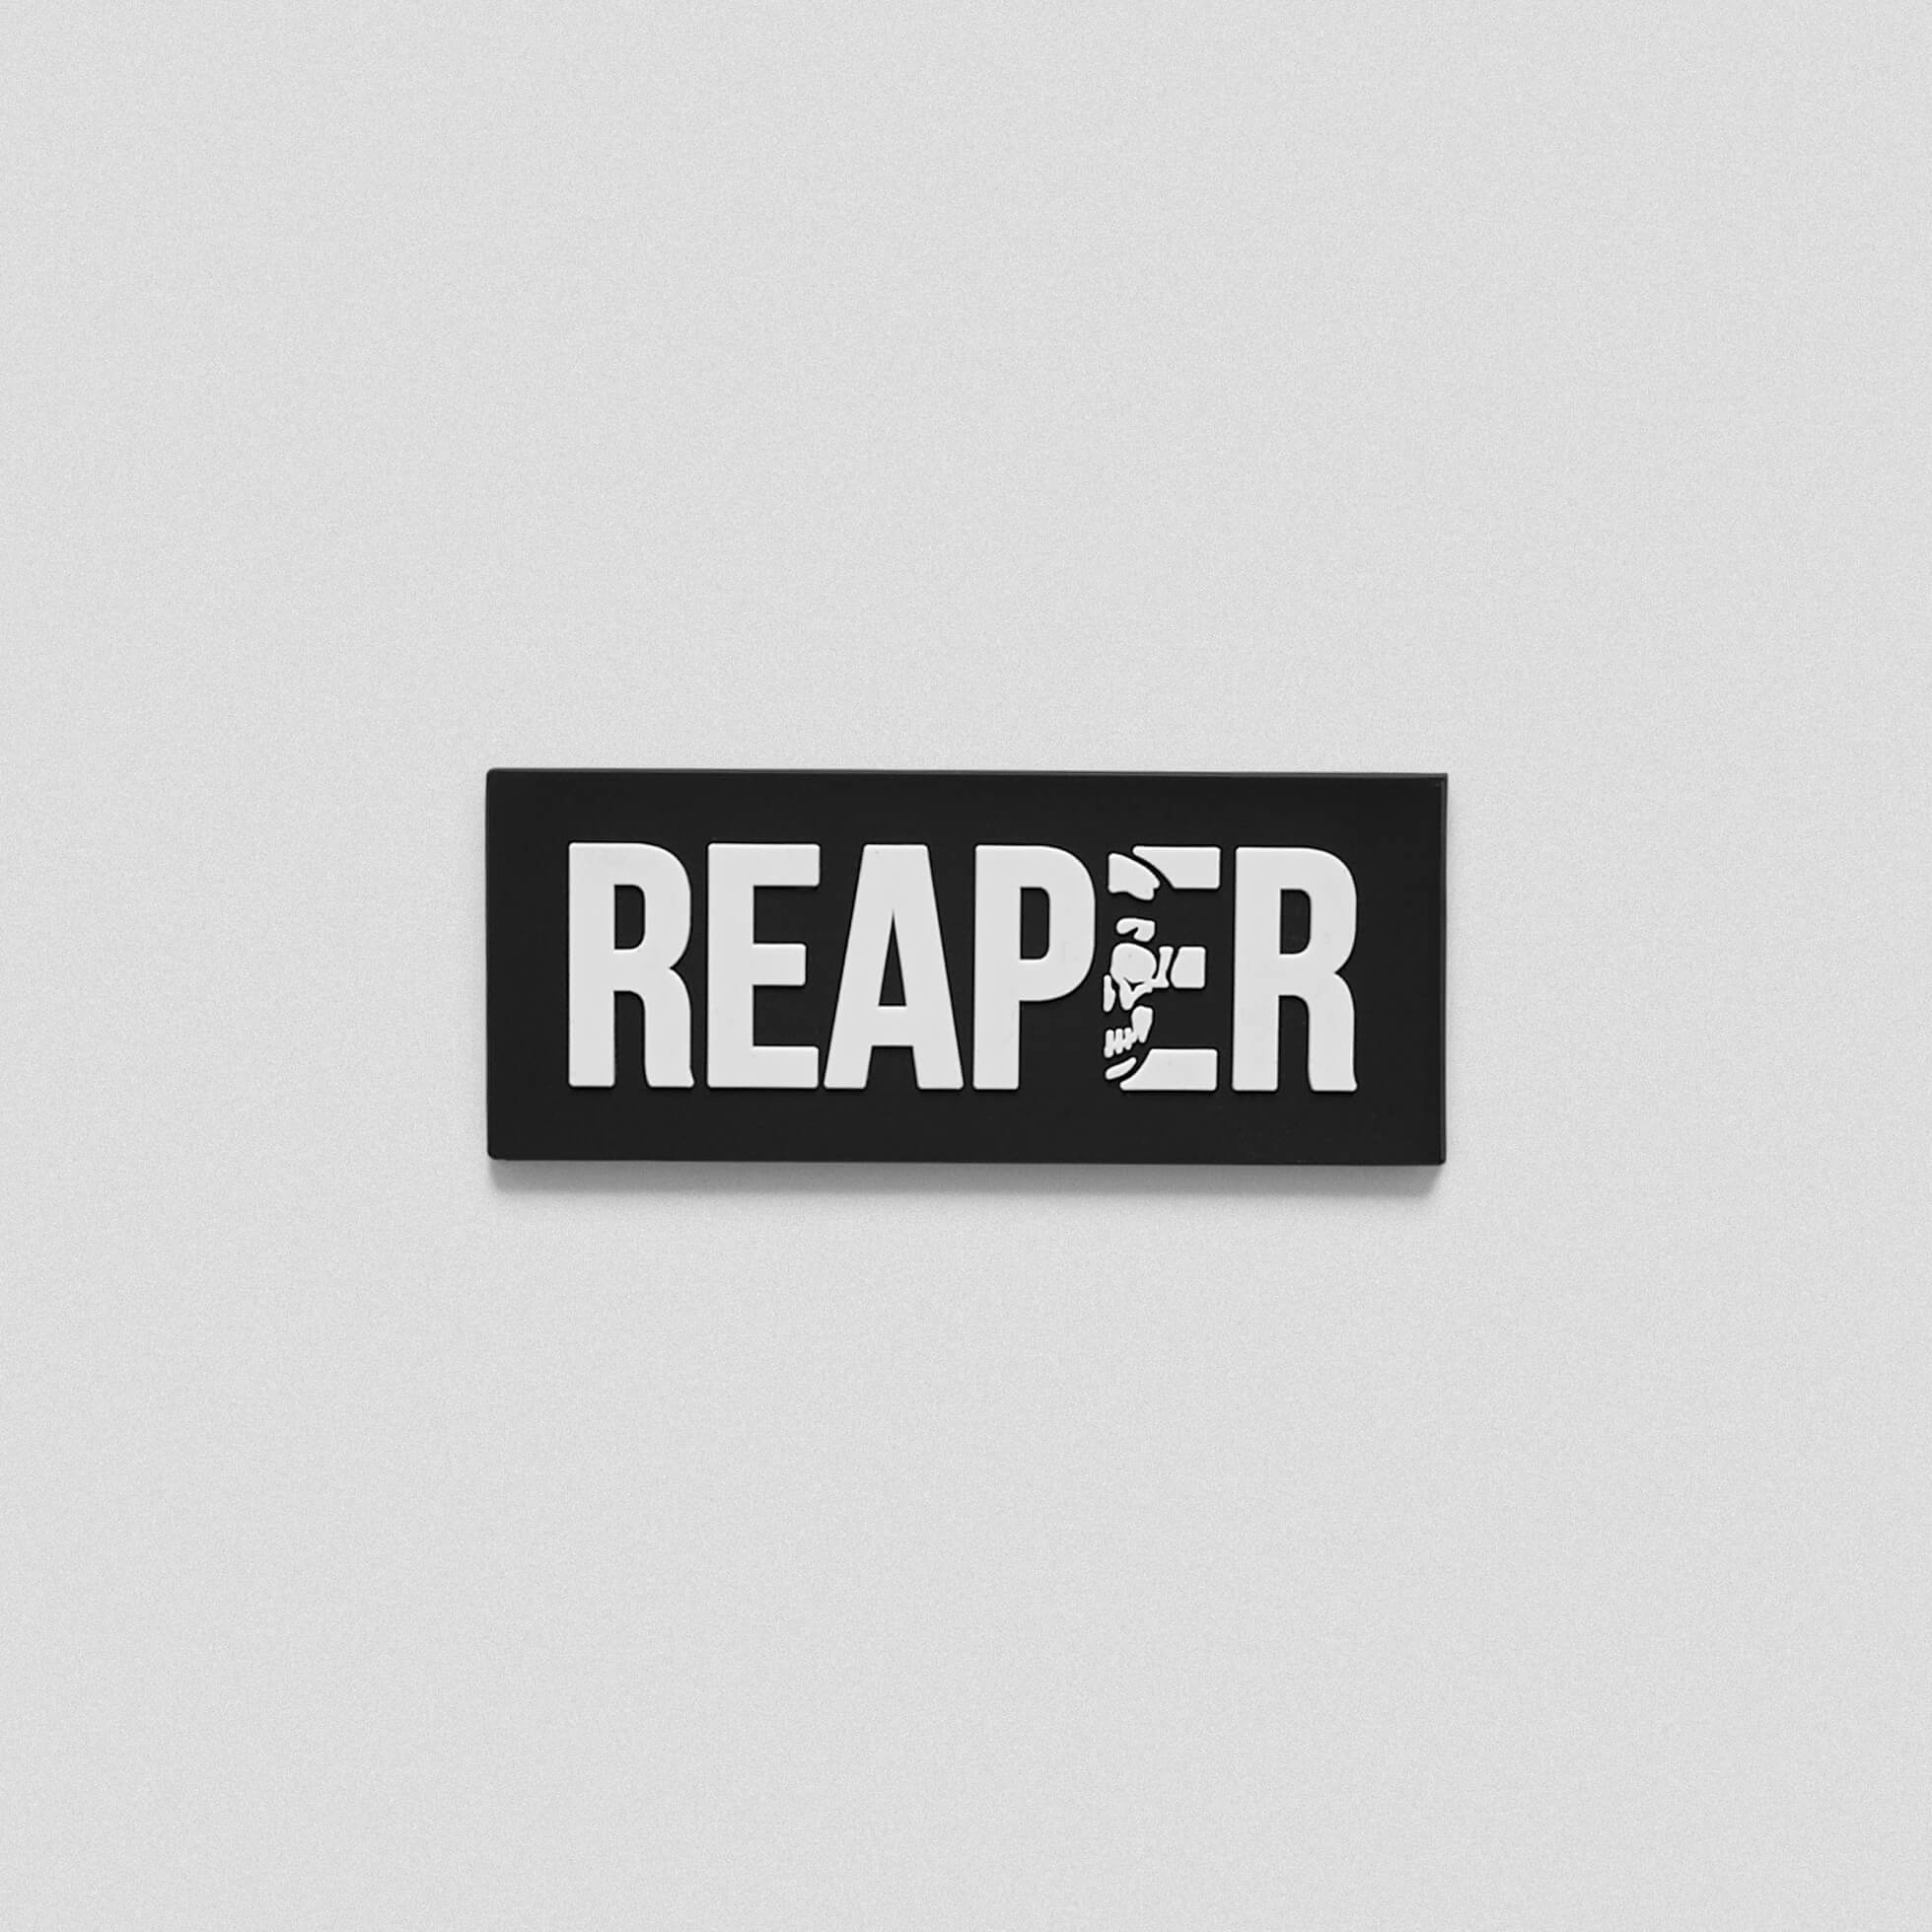 A black and white patch that says Reaper across the middle. In the letter E, there is a skull outline.